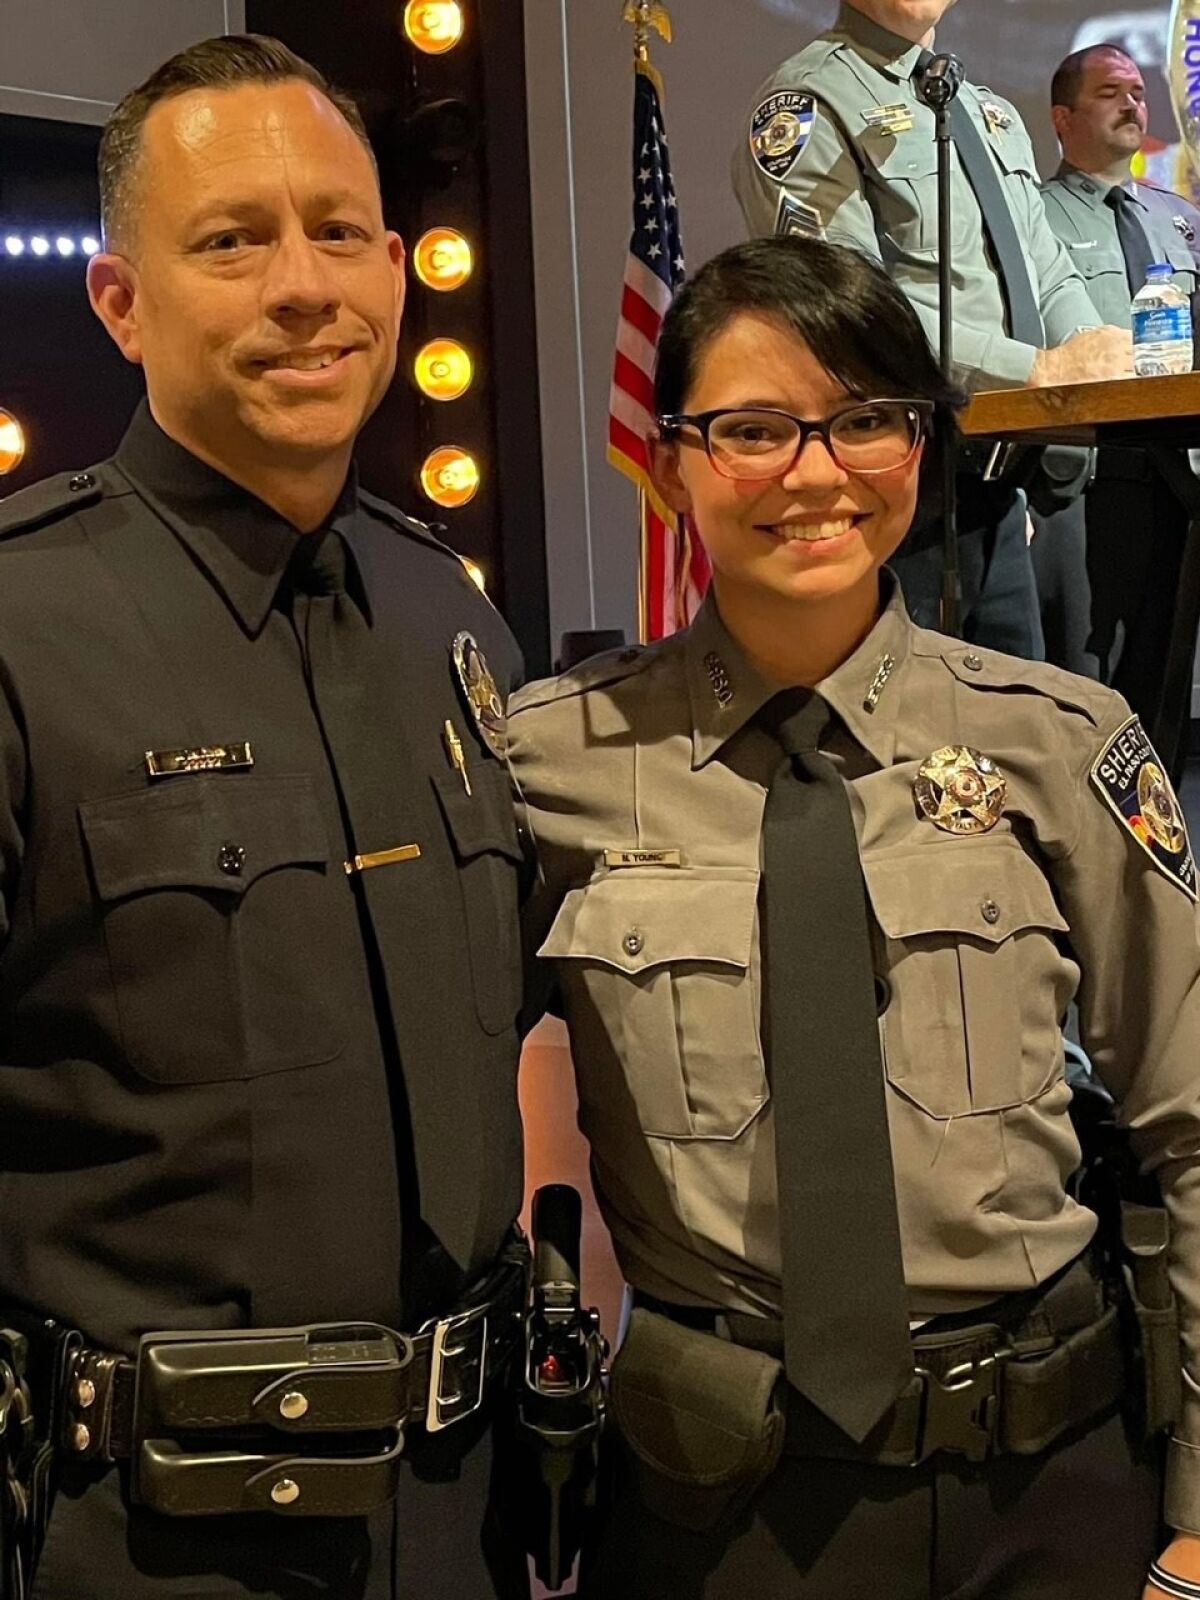 Escondido Police Sgt. Jeff Valdivia, left, with new El Paso County Sheriff's deputy Natalie Young.